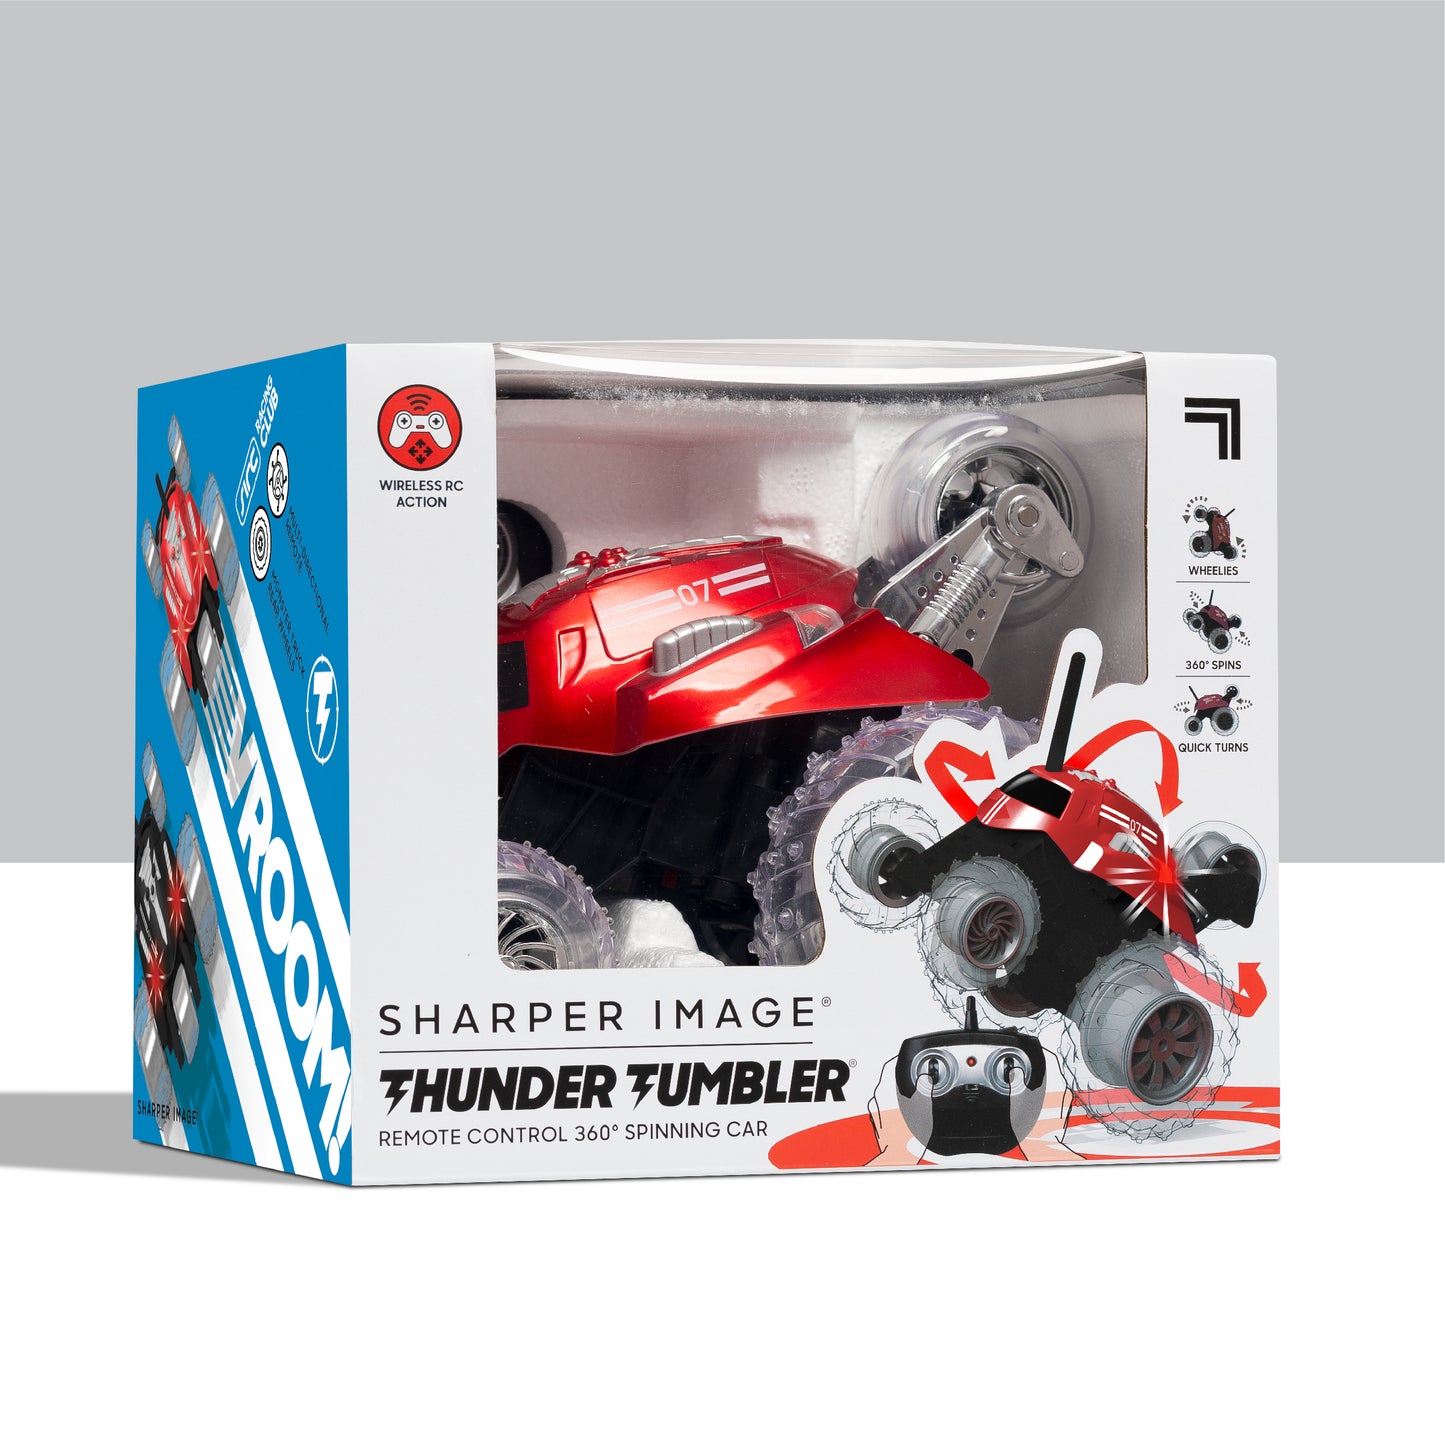 SHARPER IMAGE Thunder Tumbler Toy RC Car for Kids RED, Remote Control Monster Spinning Stunt Mini Truck for Girls and Boys